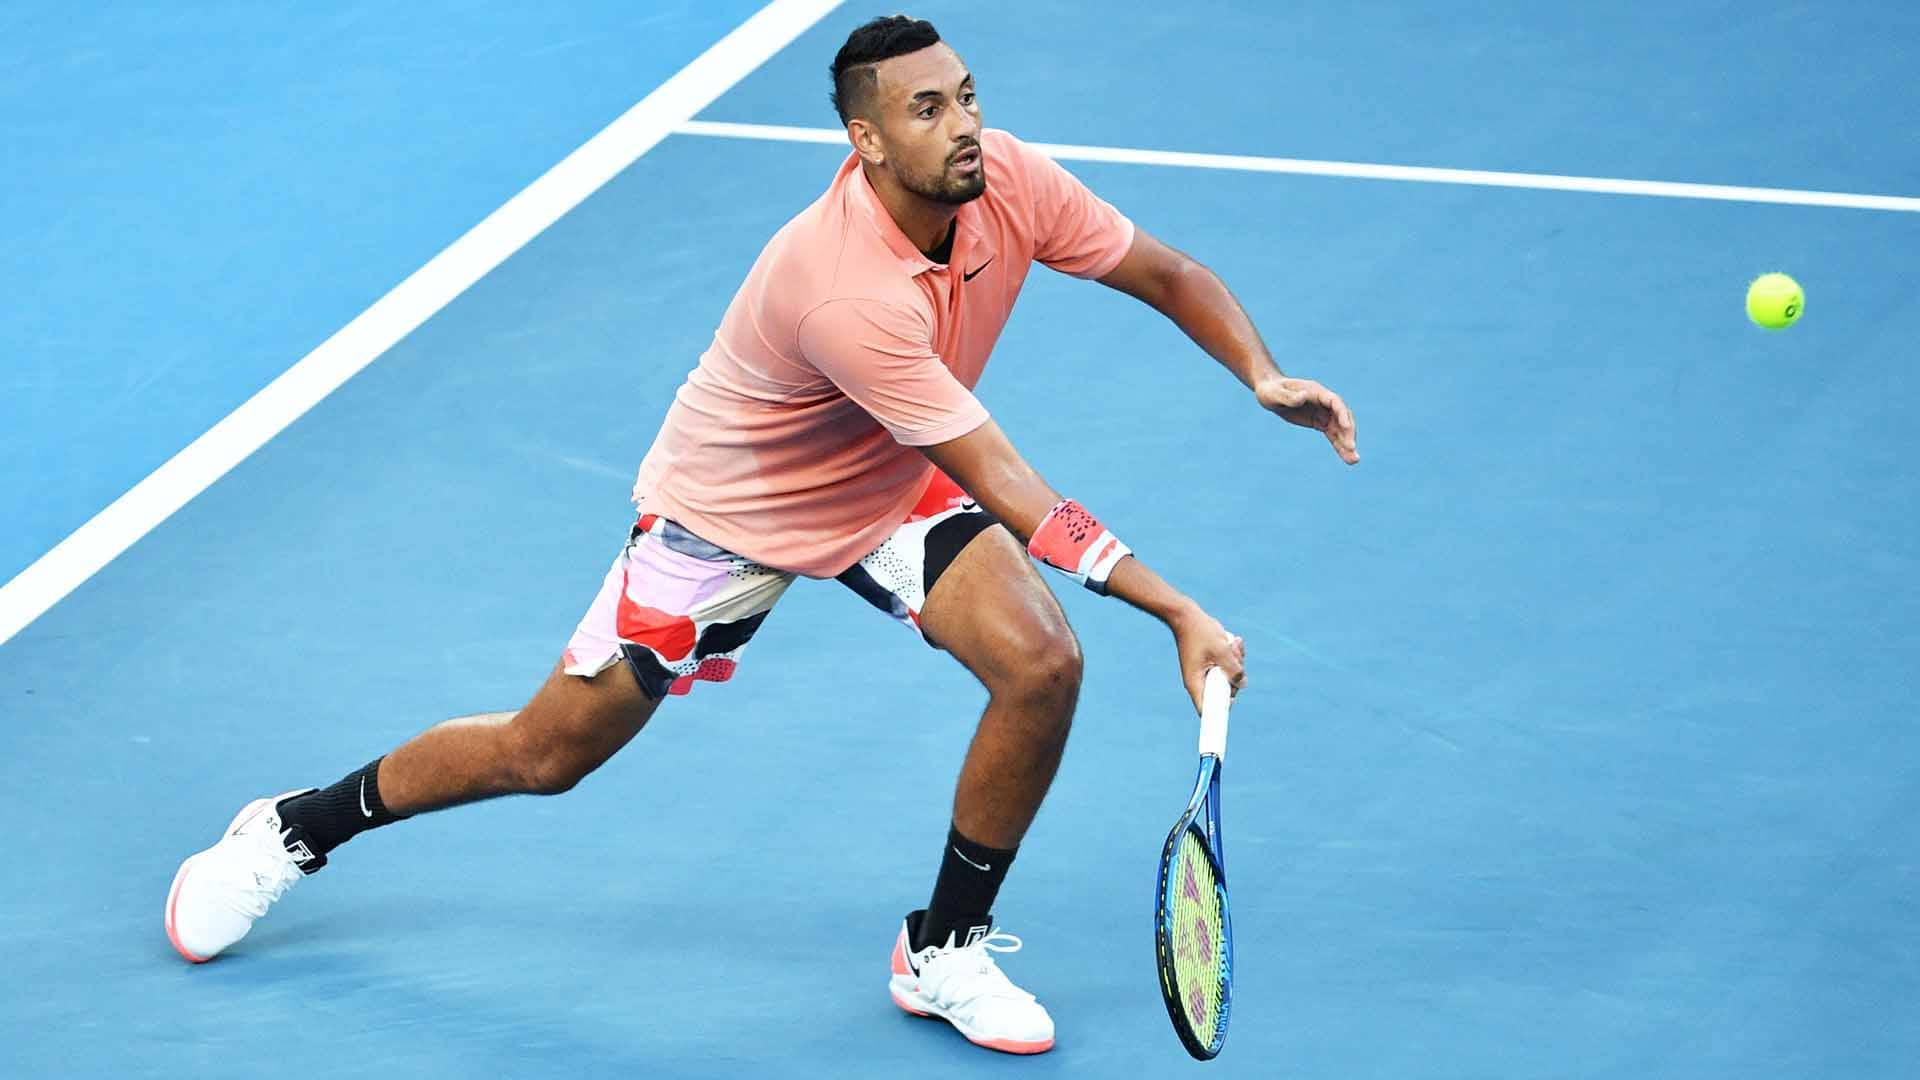 <a href='https://www.atptour.com/en/players/nick-kyrgios/ke17/overview'>Nick Kyrgios</a> is the 23rd seed at the <a href='https://www.atptour.com/en/tournaments/australian-open/580/overview'>Australian Open</a>.